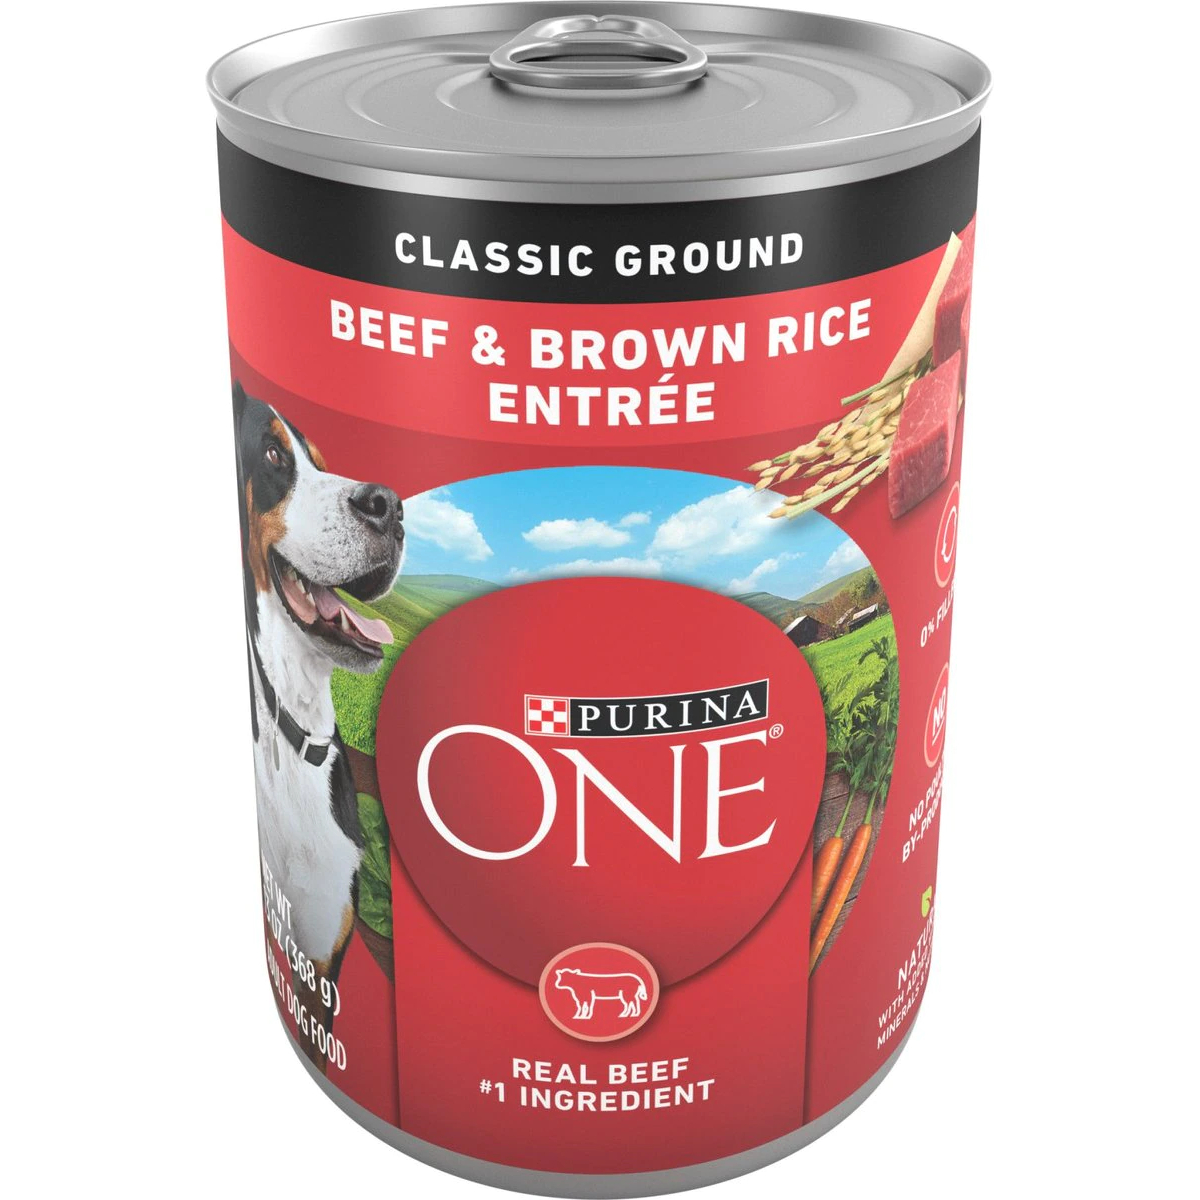 Purina ONE SmartBlend Classic Ground Beef & Brown Rice Entree Adult Canned Dog Food